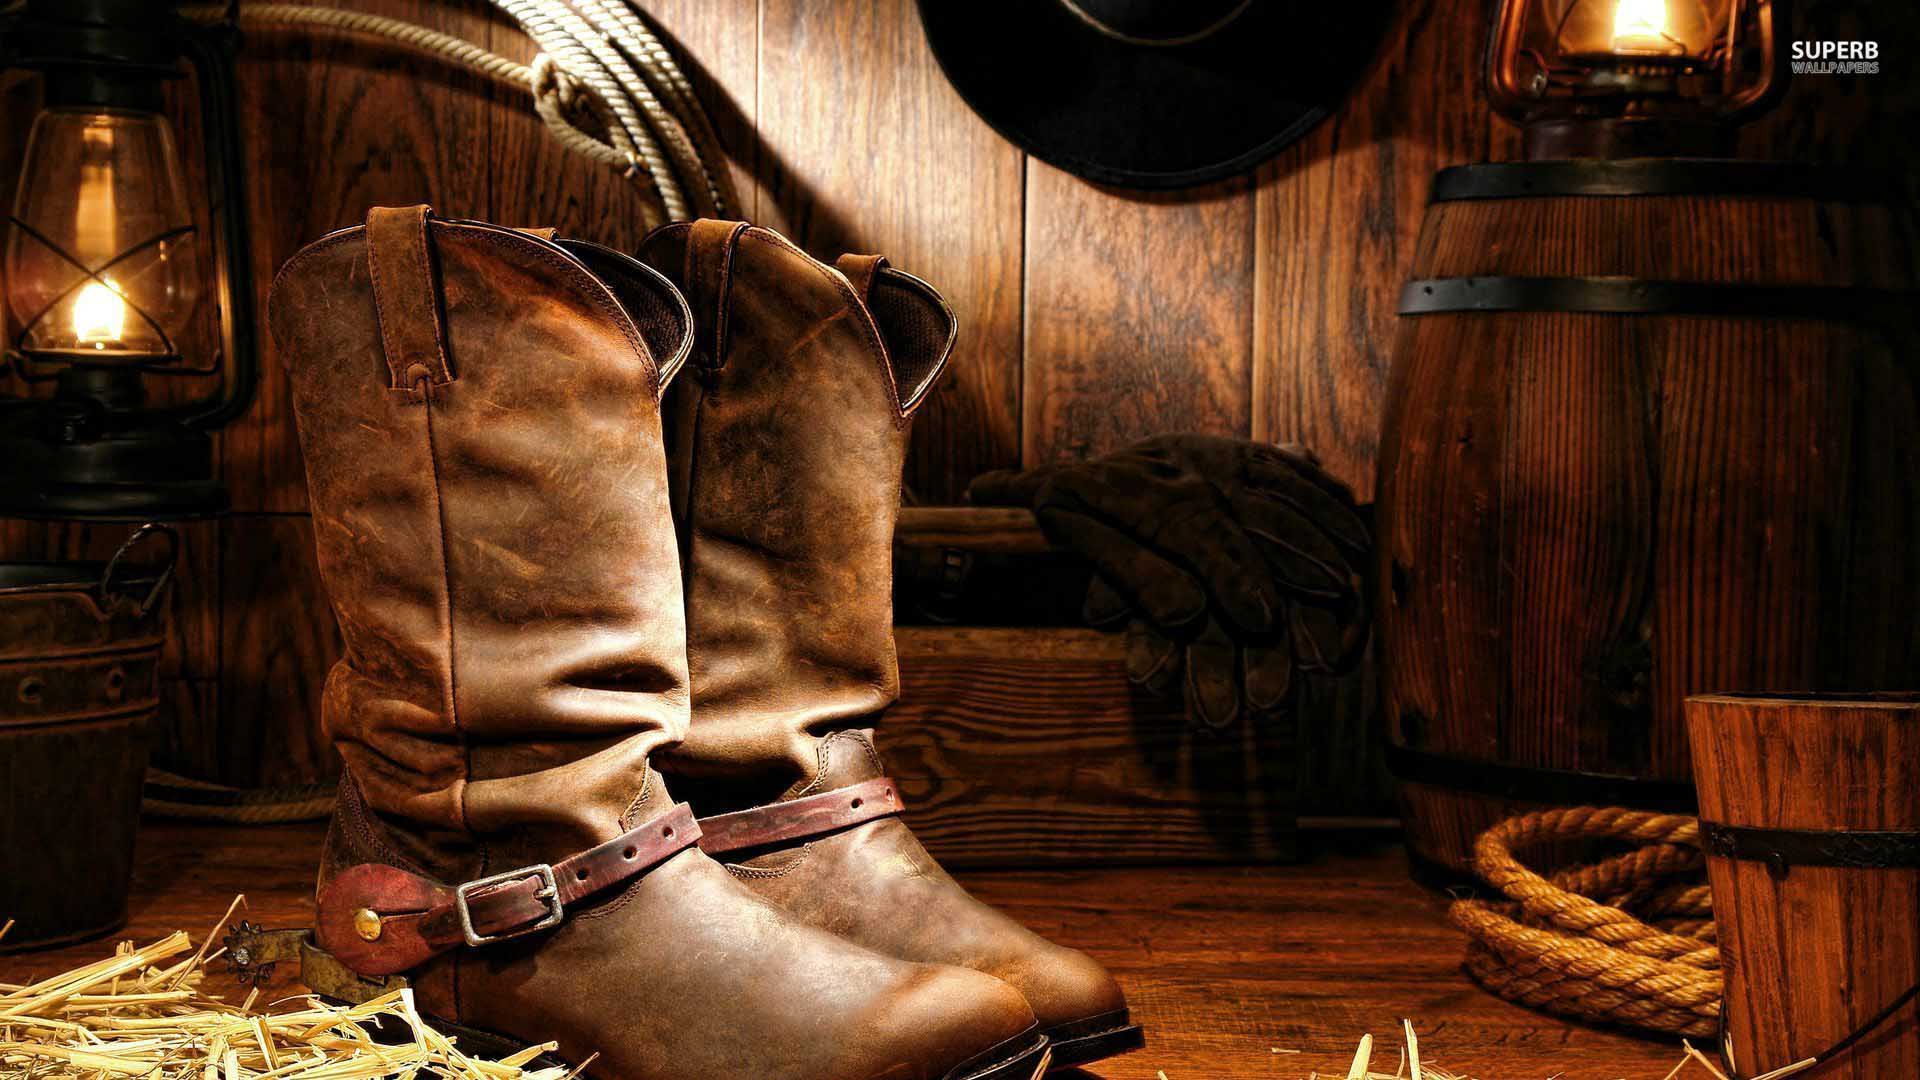 Cowboy Boots Desktop Wallpaper Daily Background In HD